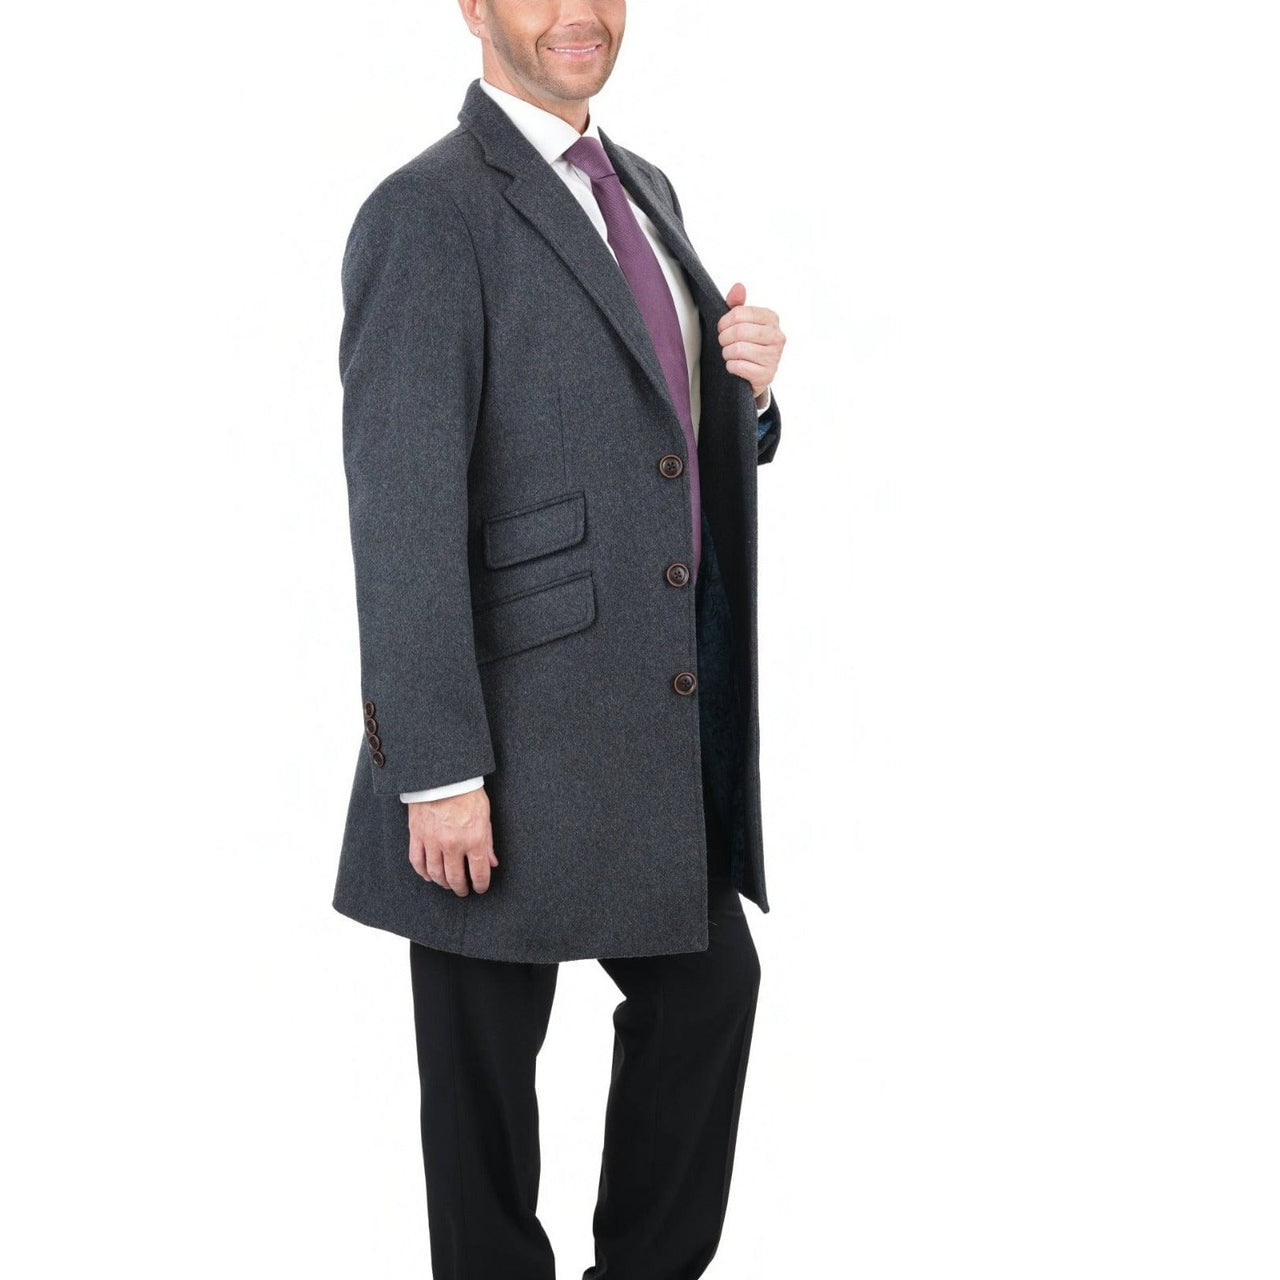 Arthur Black OUTERWEAR The Suit Depot Men's Wool Cashmere Single Breasted Charcoal 3/4 Length Top Coat